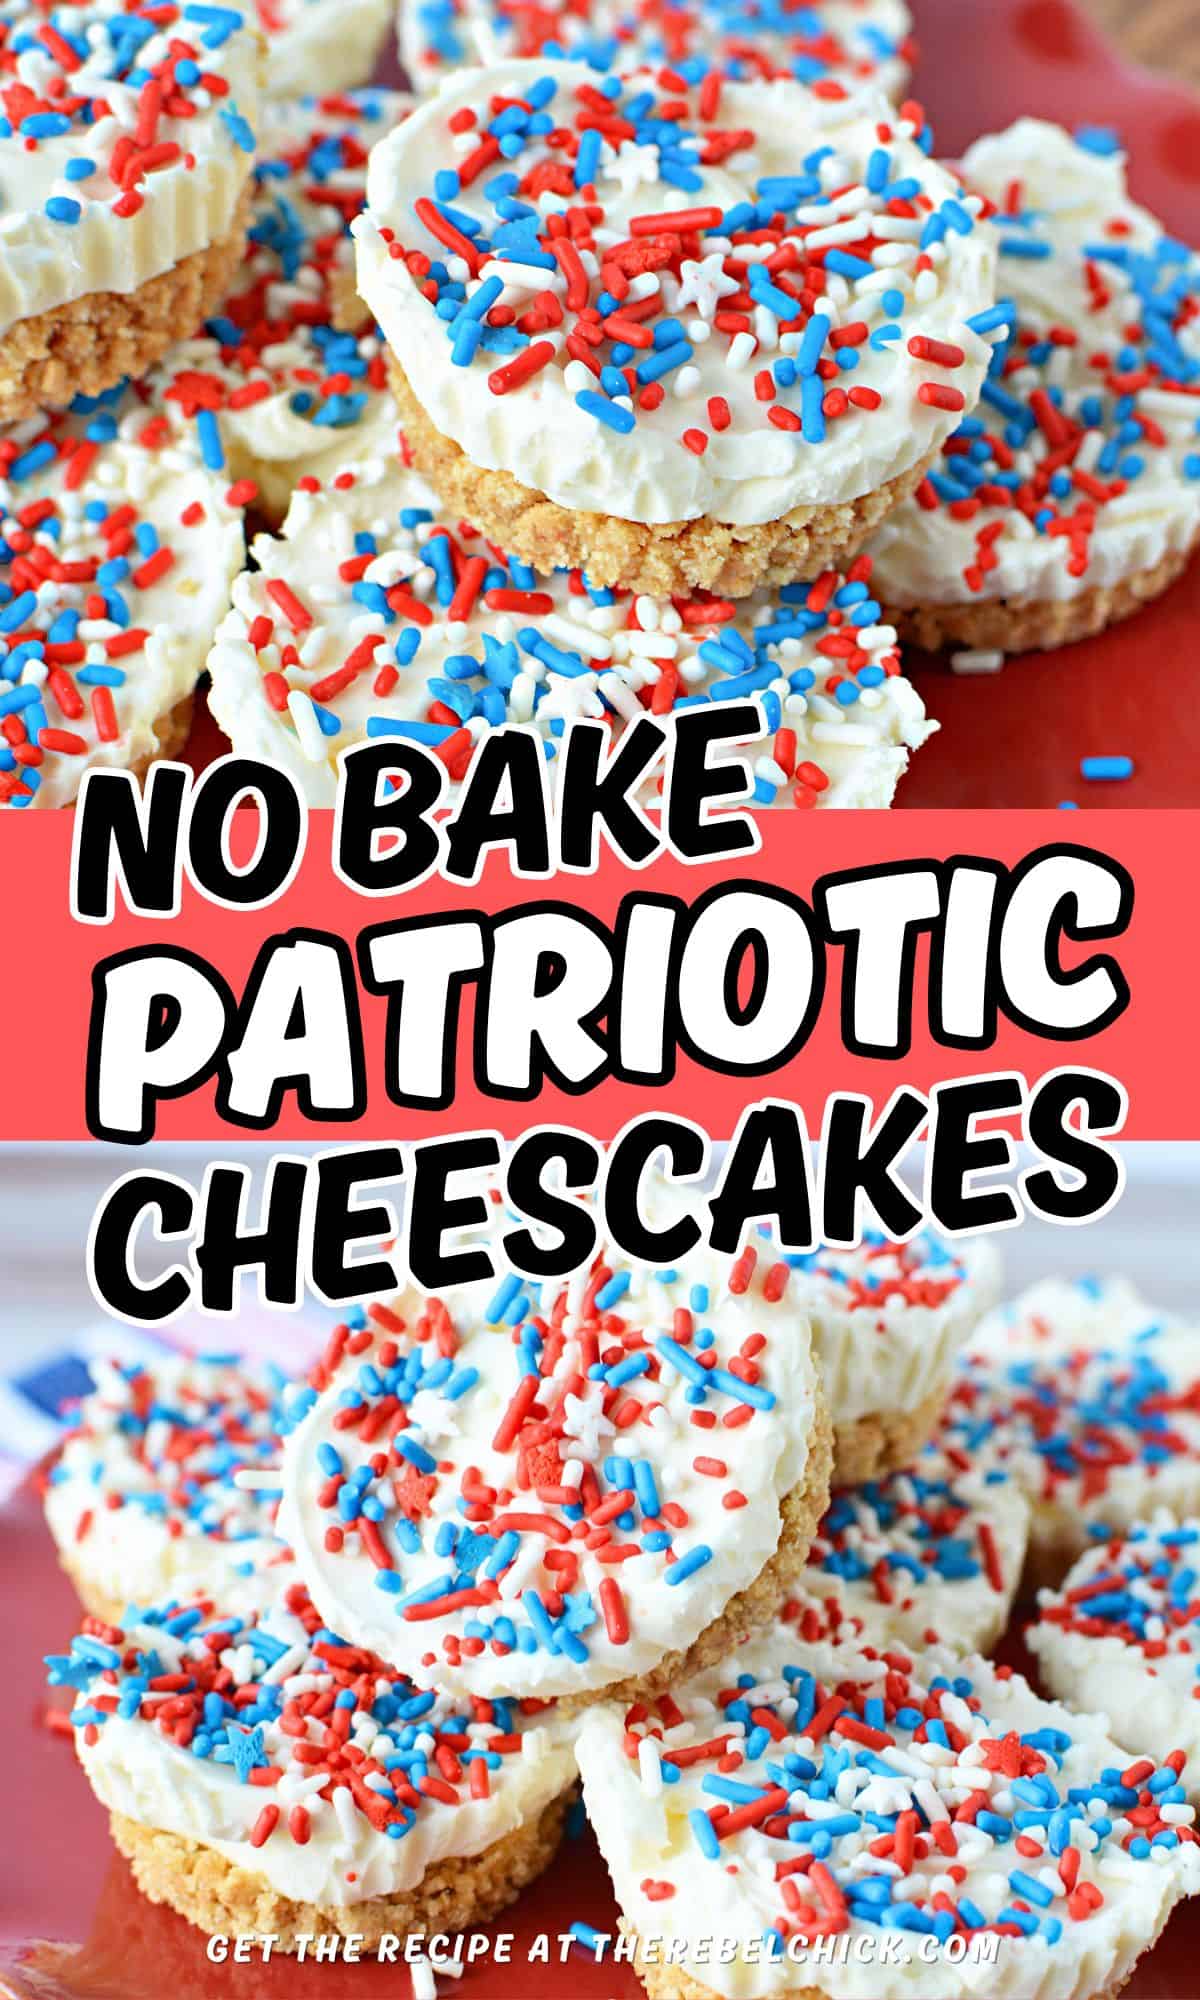 Patriotic Red White and Blue Cheesecakes Recipe